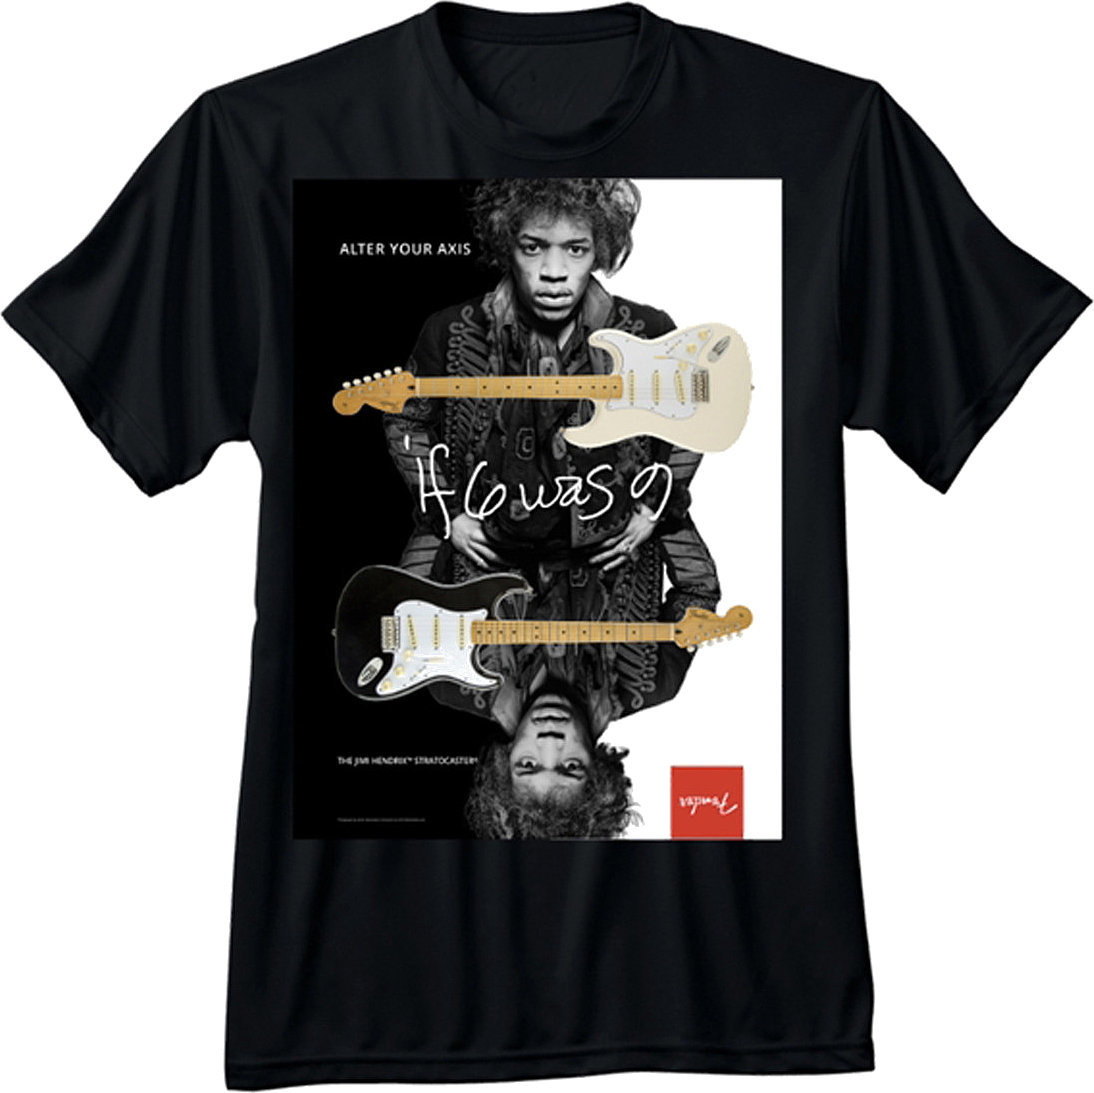 Shirt Fender Jimi Hendrix Collection Alter Your Axis T-Shirt Black XL